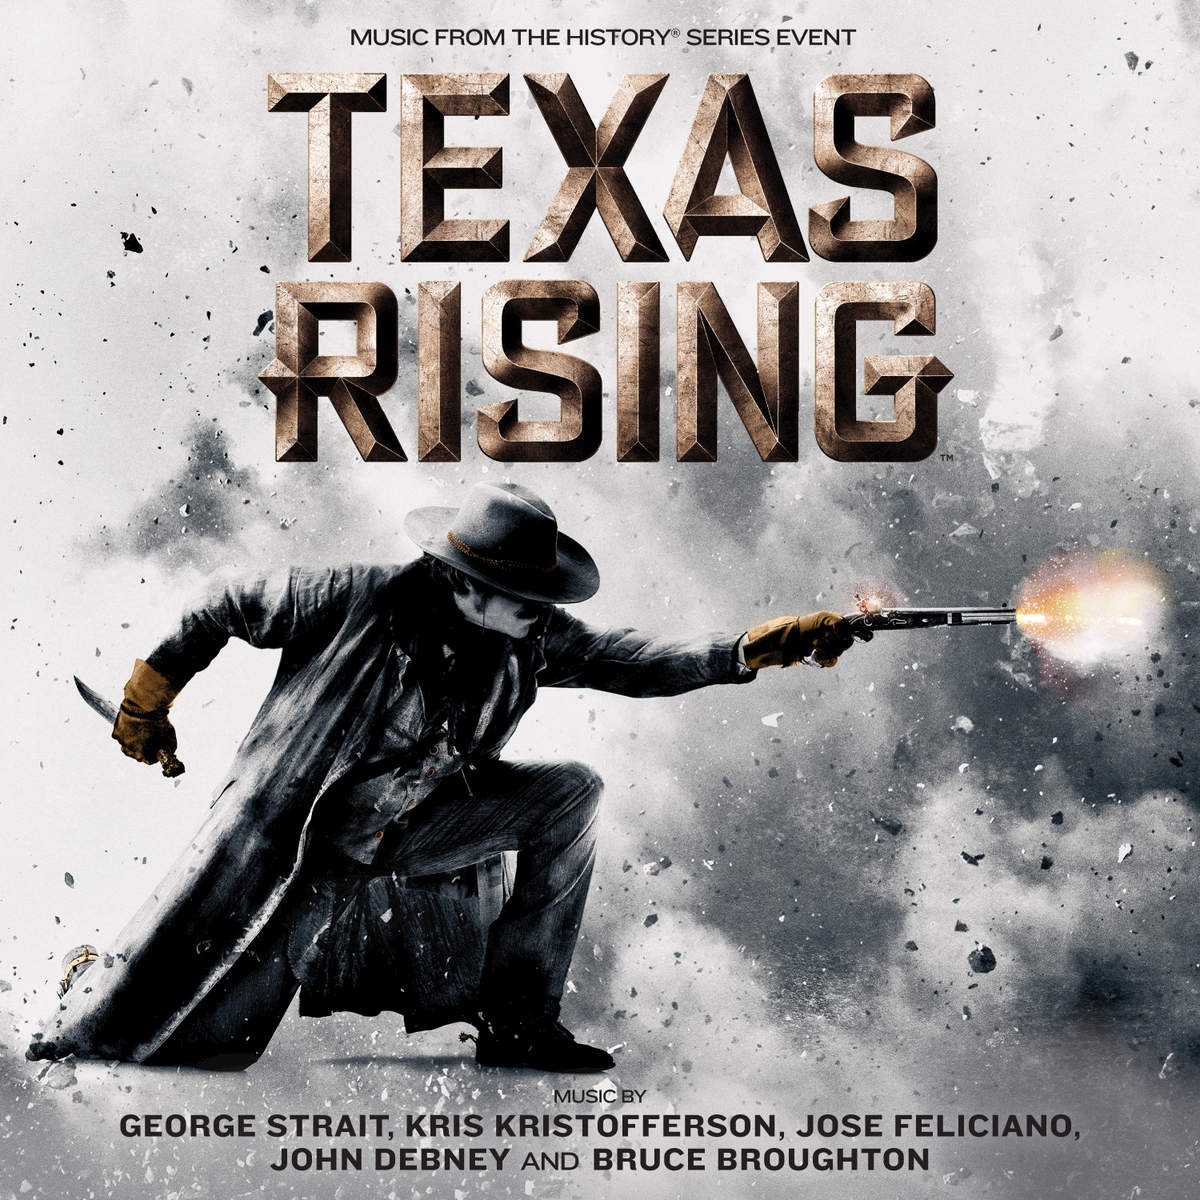 Lorca' s Hanging Bodies  From " Texas Rising" Mini Series Soundtrack